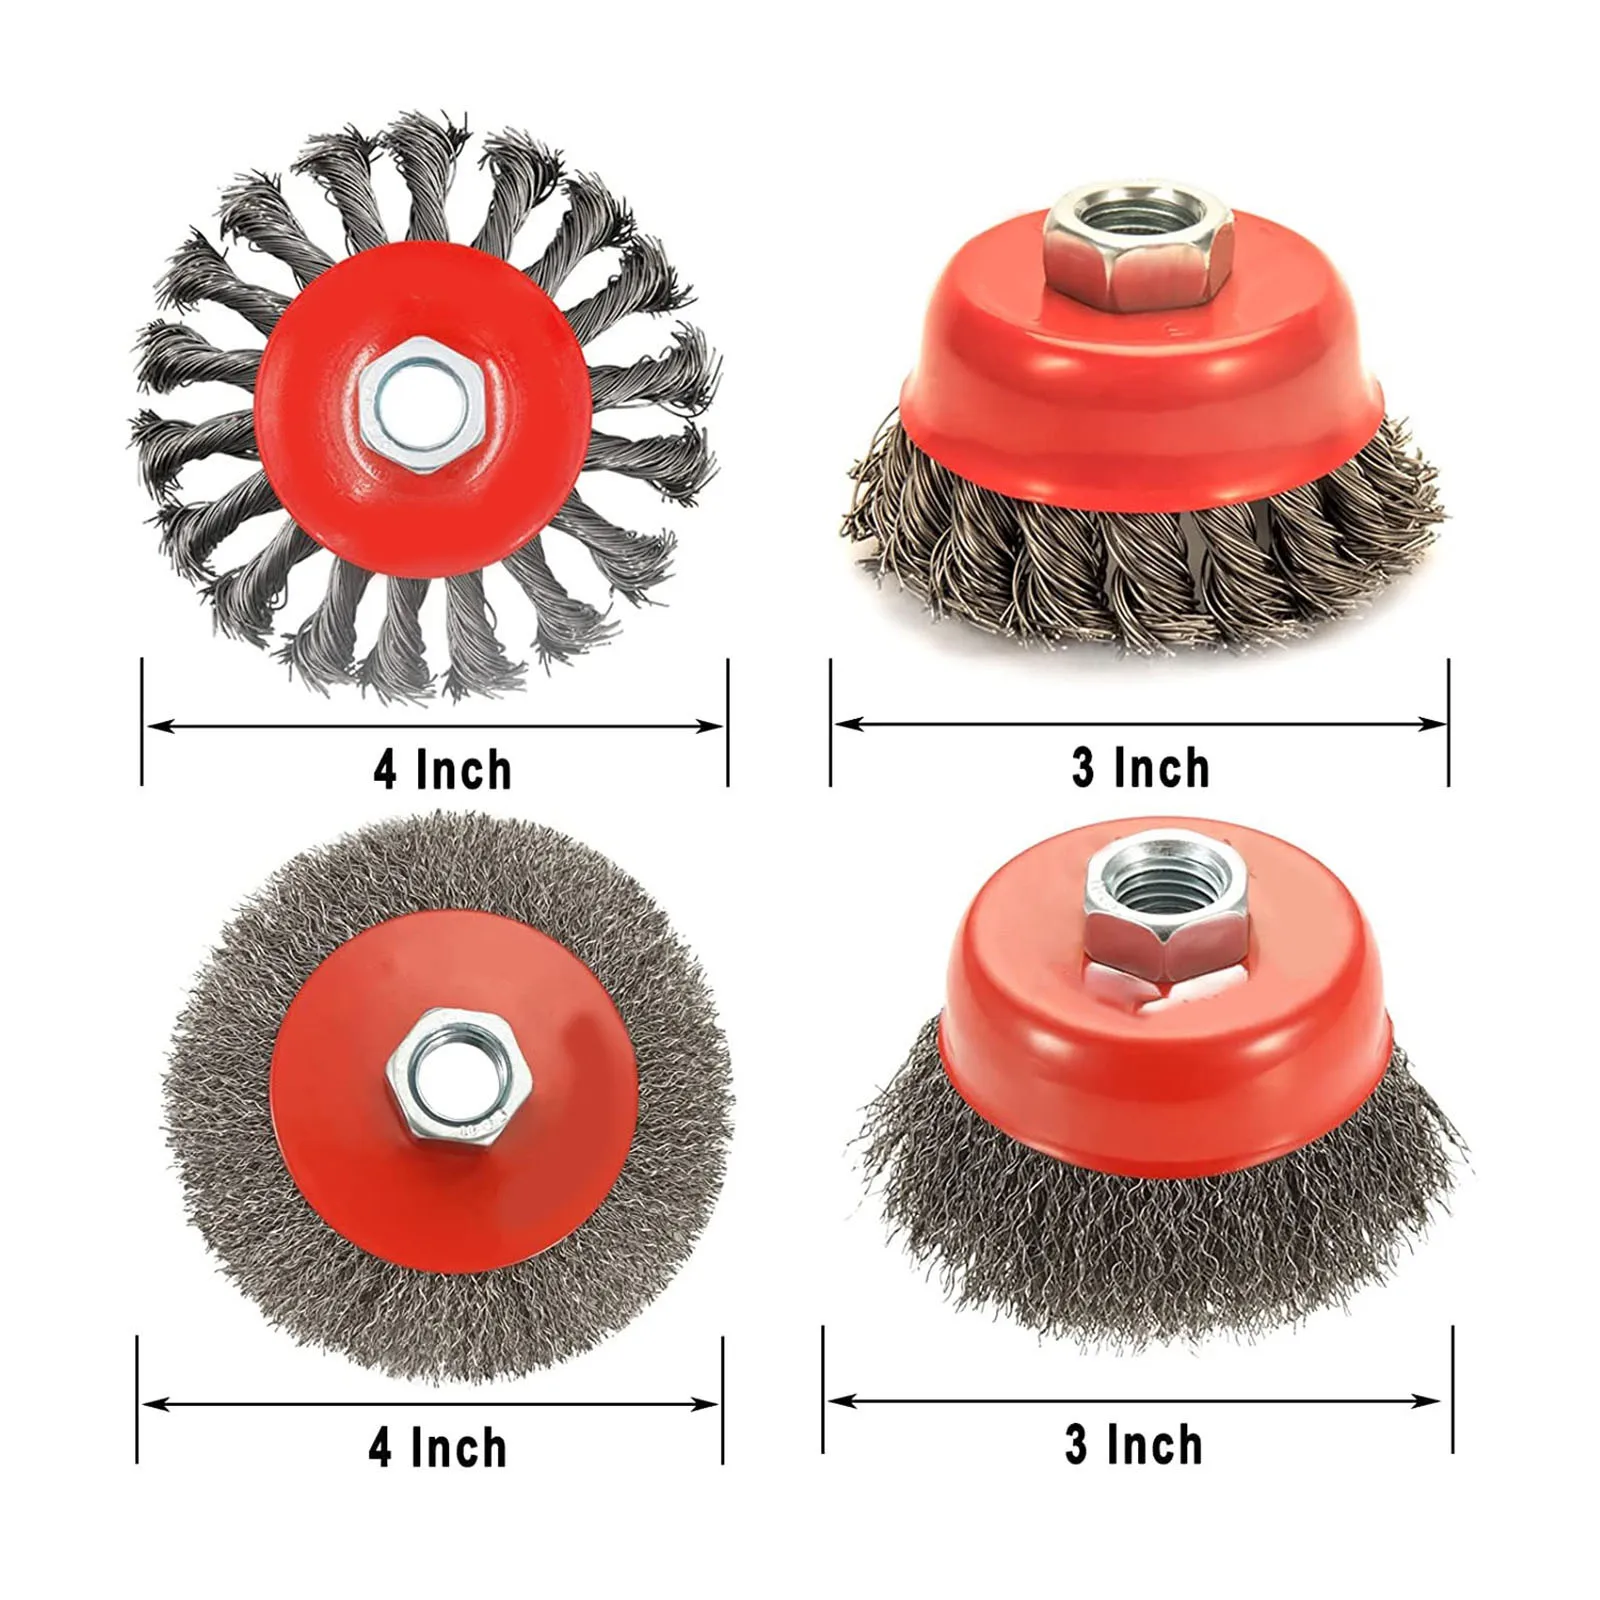 https://ae01.alicdn.com/kf/S3d780017ab6240d9b59d1faa6d941030n/4Pcs-3-4-Inch-Carbon-Steel-Wire-Wheel-Cup-Brush-Set-For-5-8-11UNC-Angle.jpeg